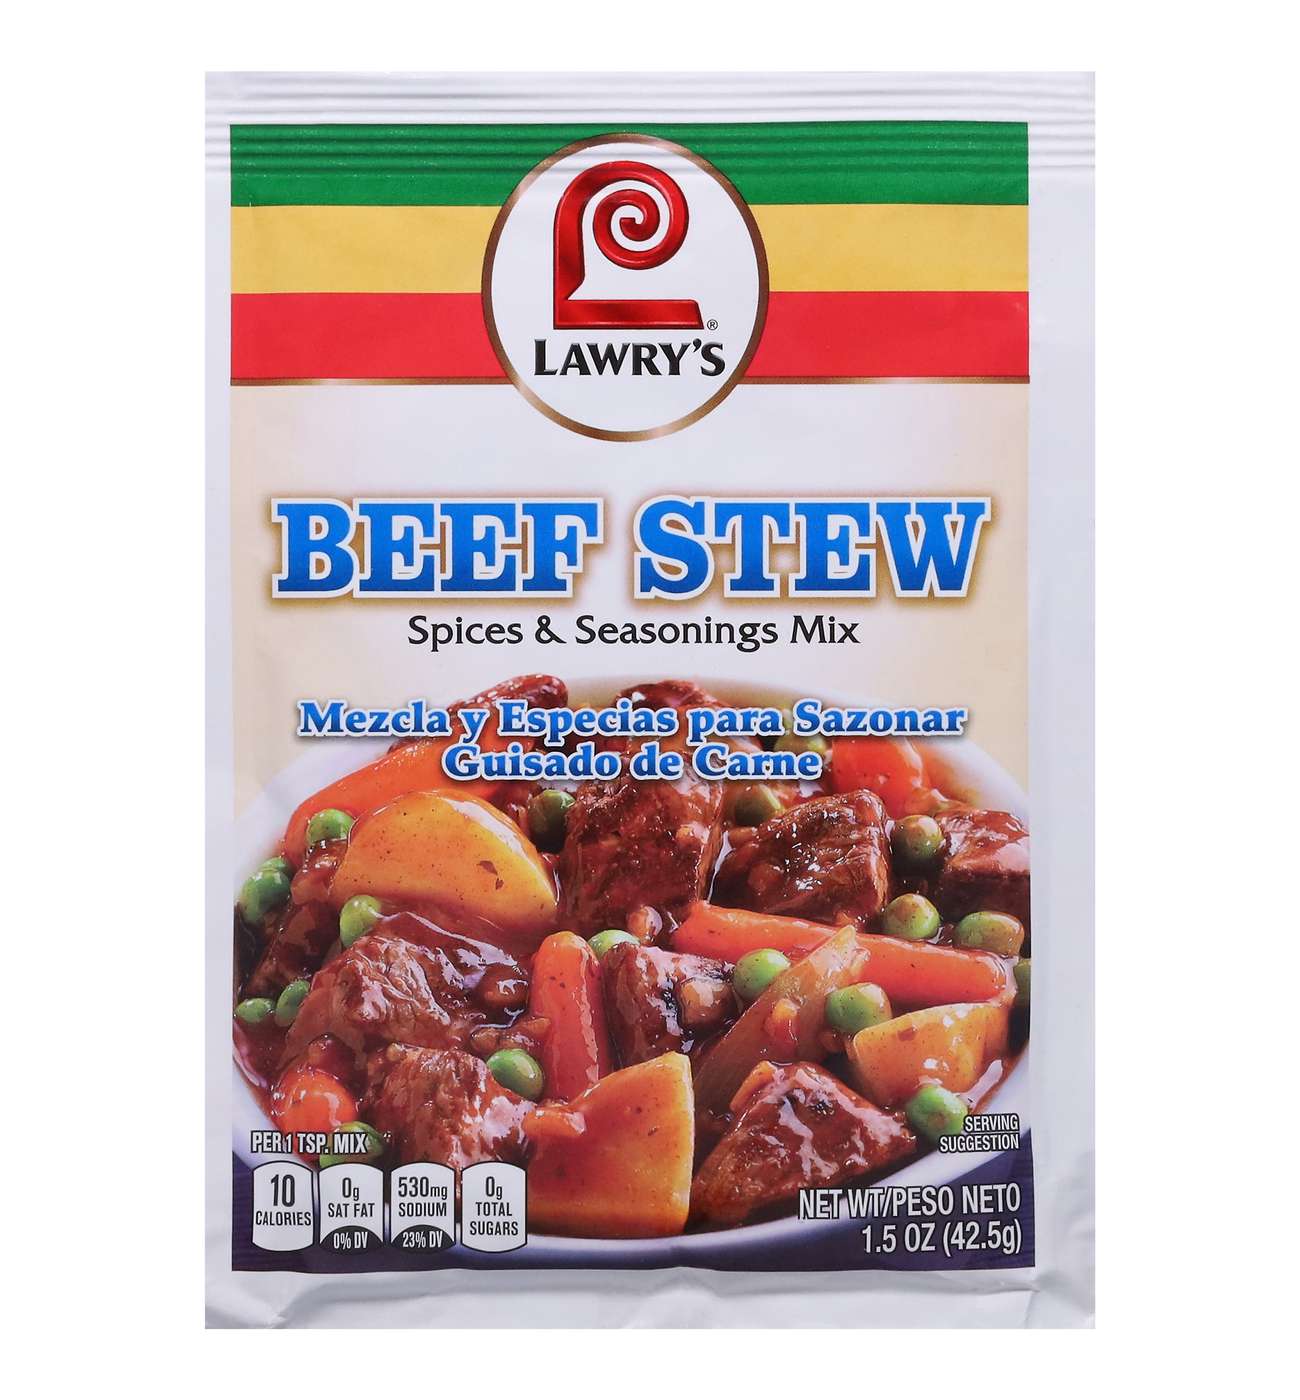 Lawry's Beef Stew Spices & Seasonings Mix; image 1 of 3